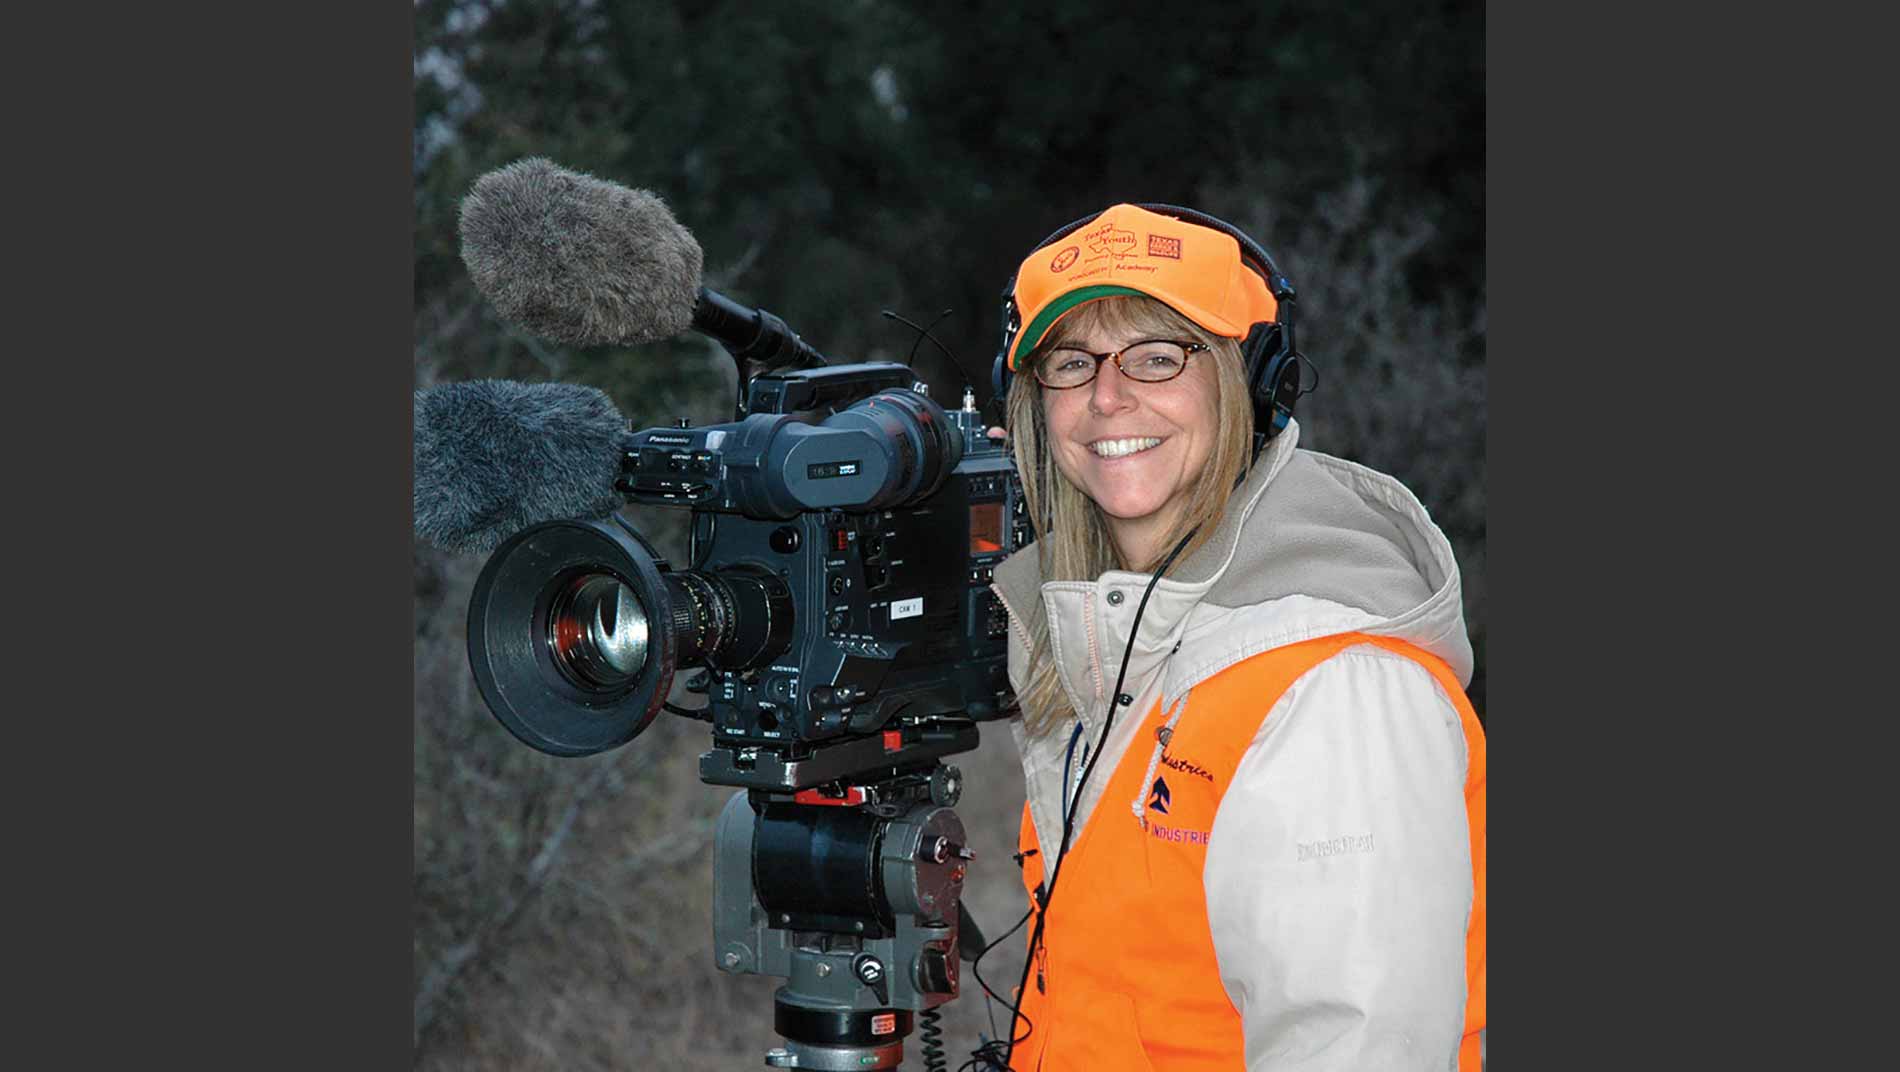 Producer Karen Loke on location in the Texas Hill Country.